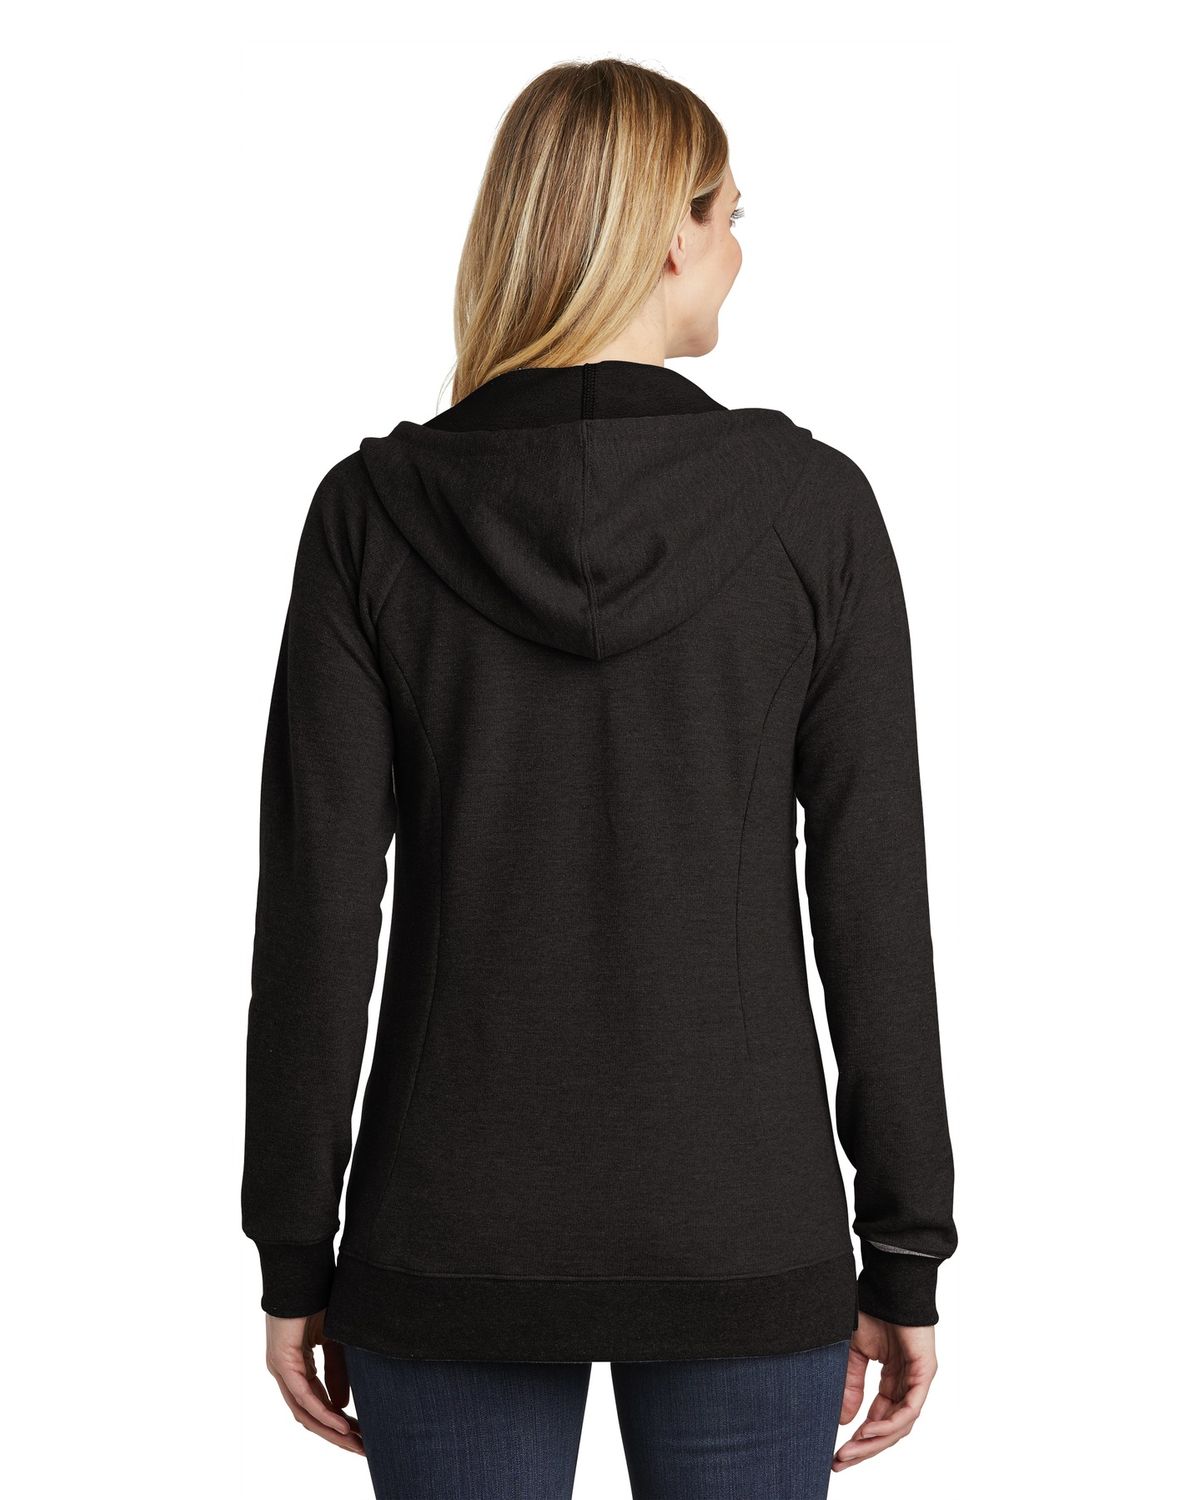 'District DT456 Women's Perfect Tri French Terry FullZip Hoodie'